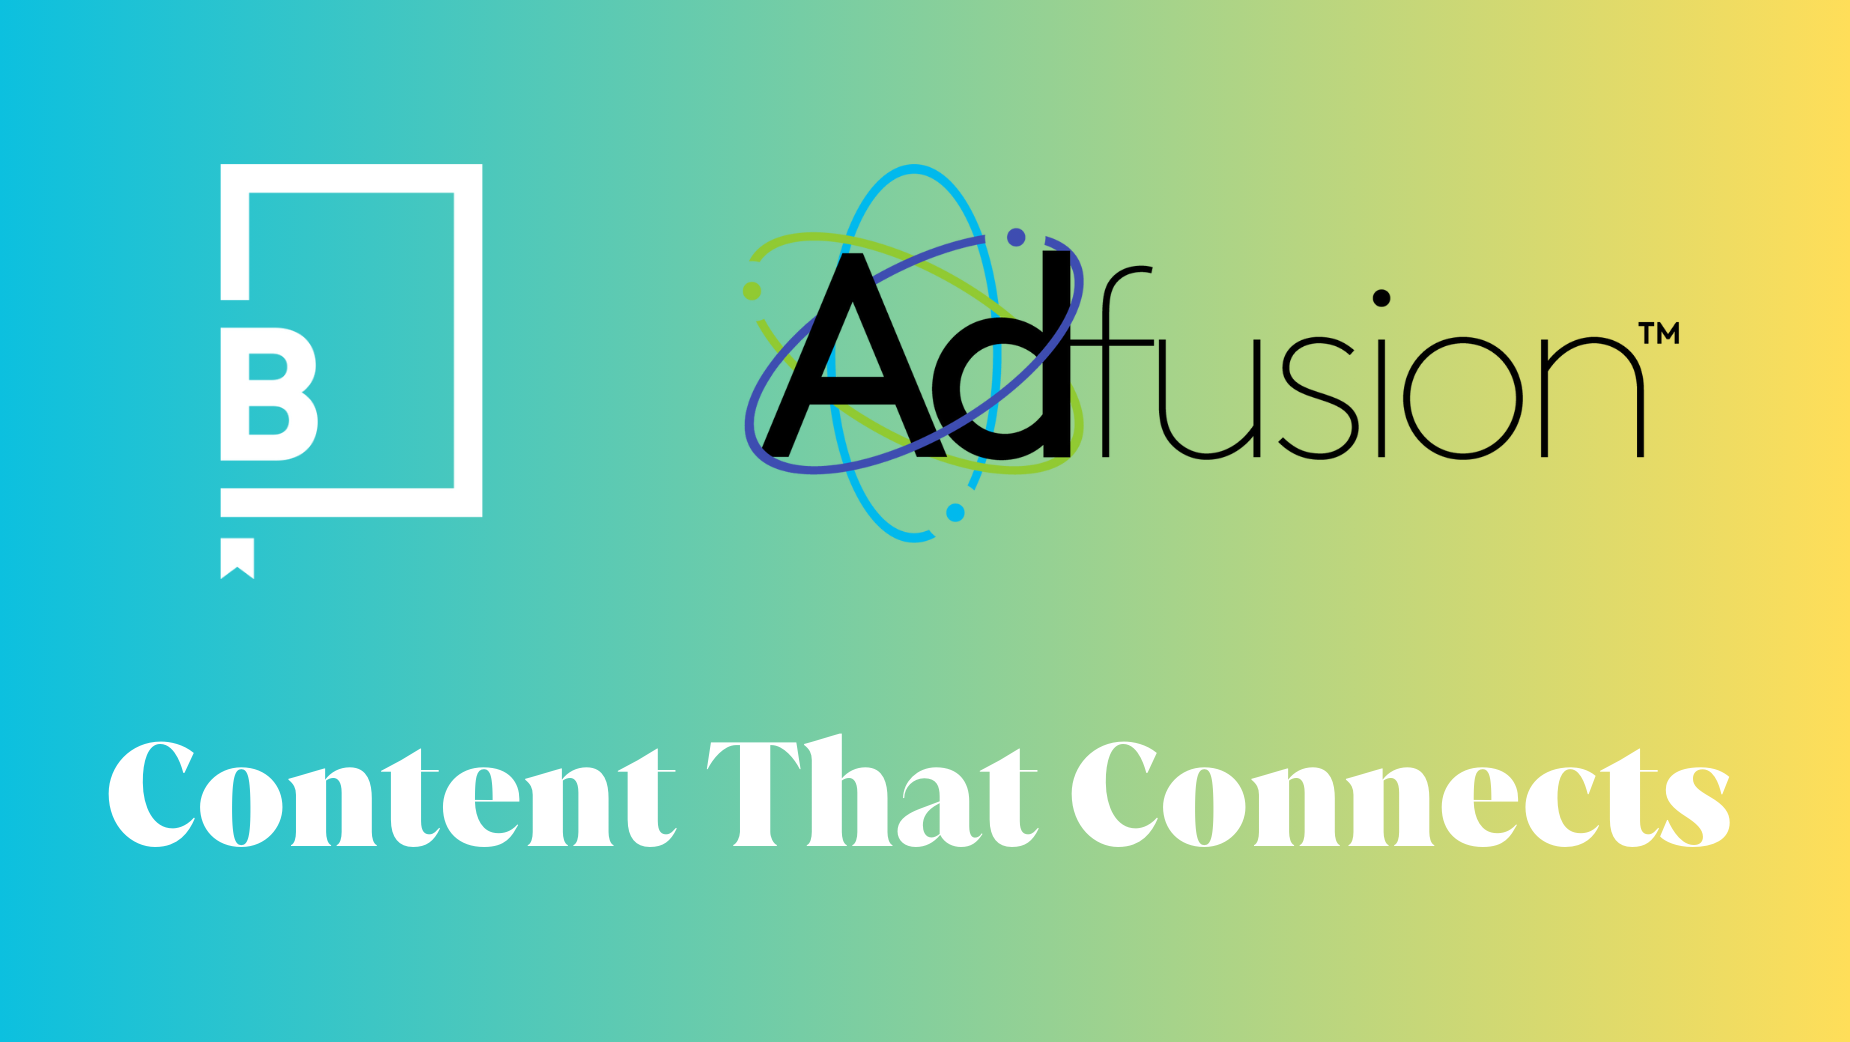 Future-Driving Advertising: LBB and AdFusion™ Collaborate for a New Season of Content That Connects